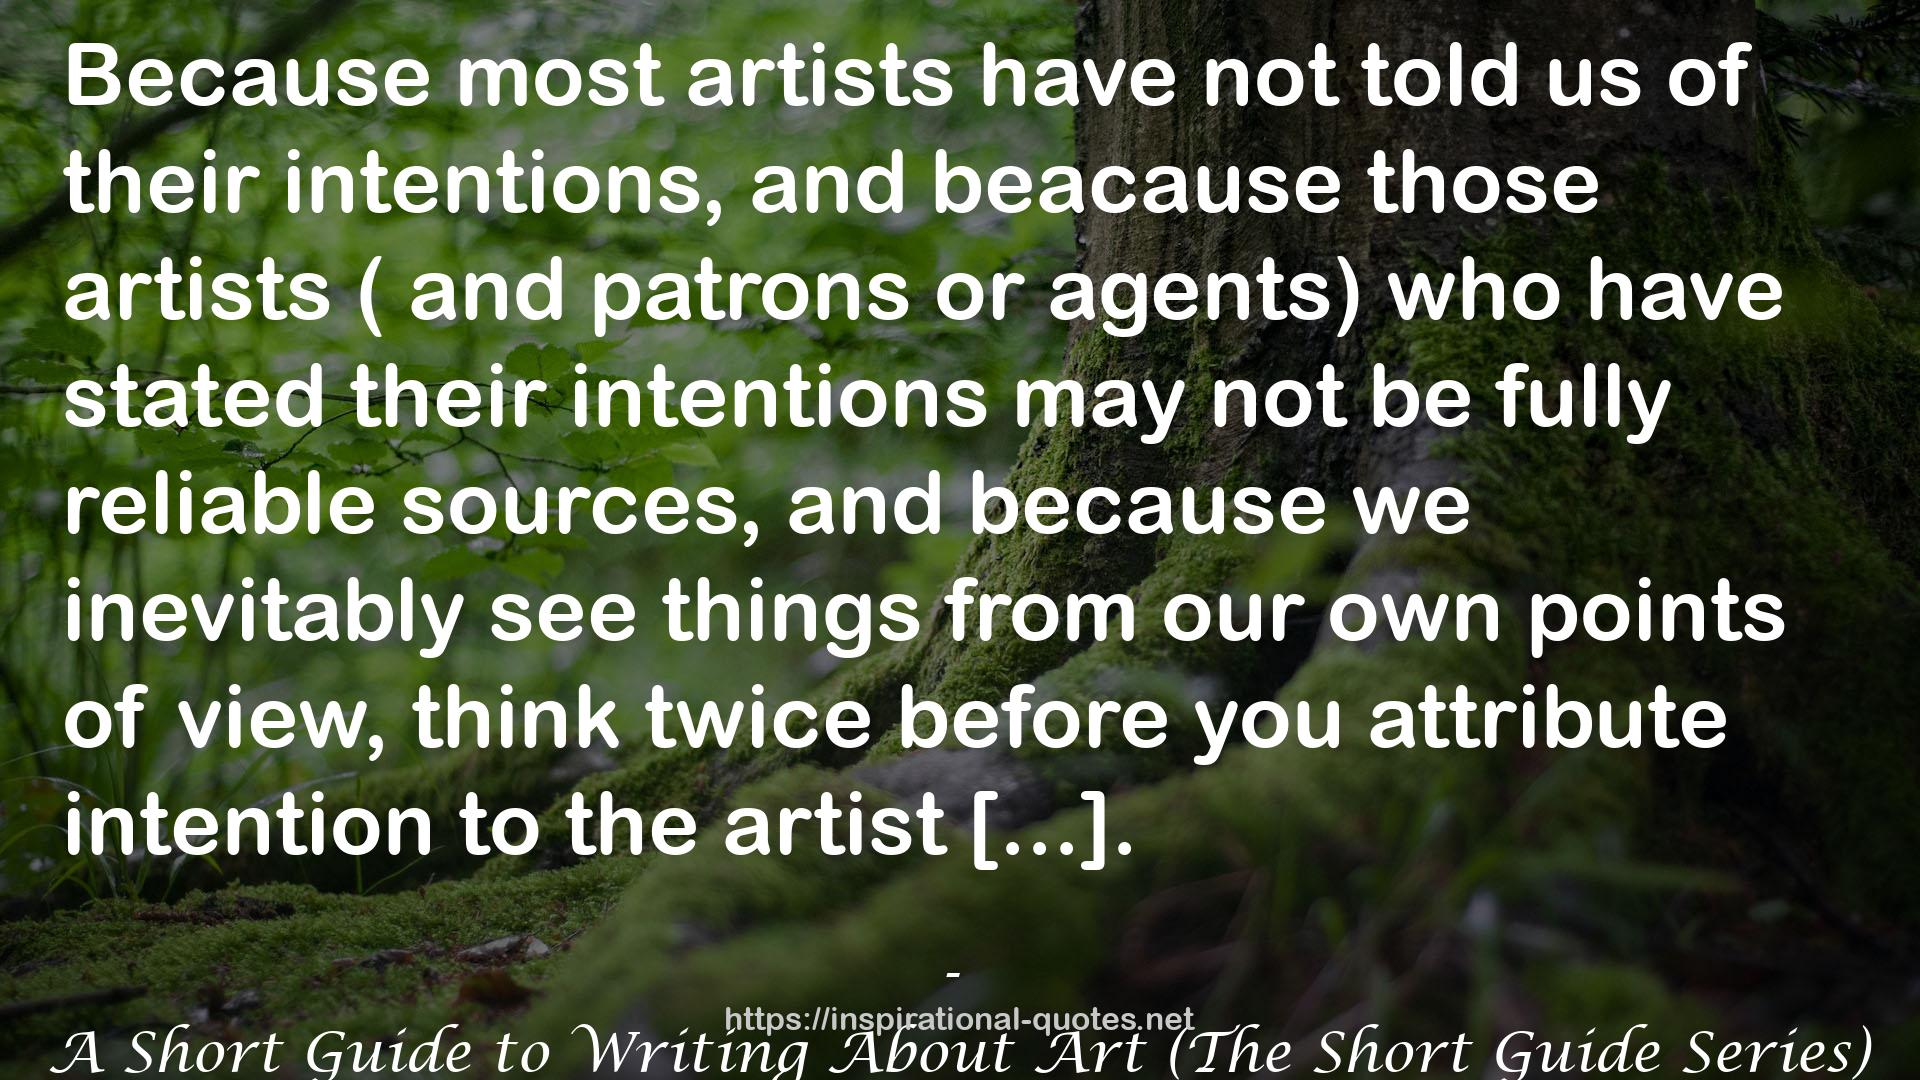 A Short Guide to Writing About Art (The Short Guide Series) QUOTES